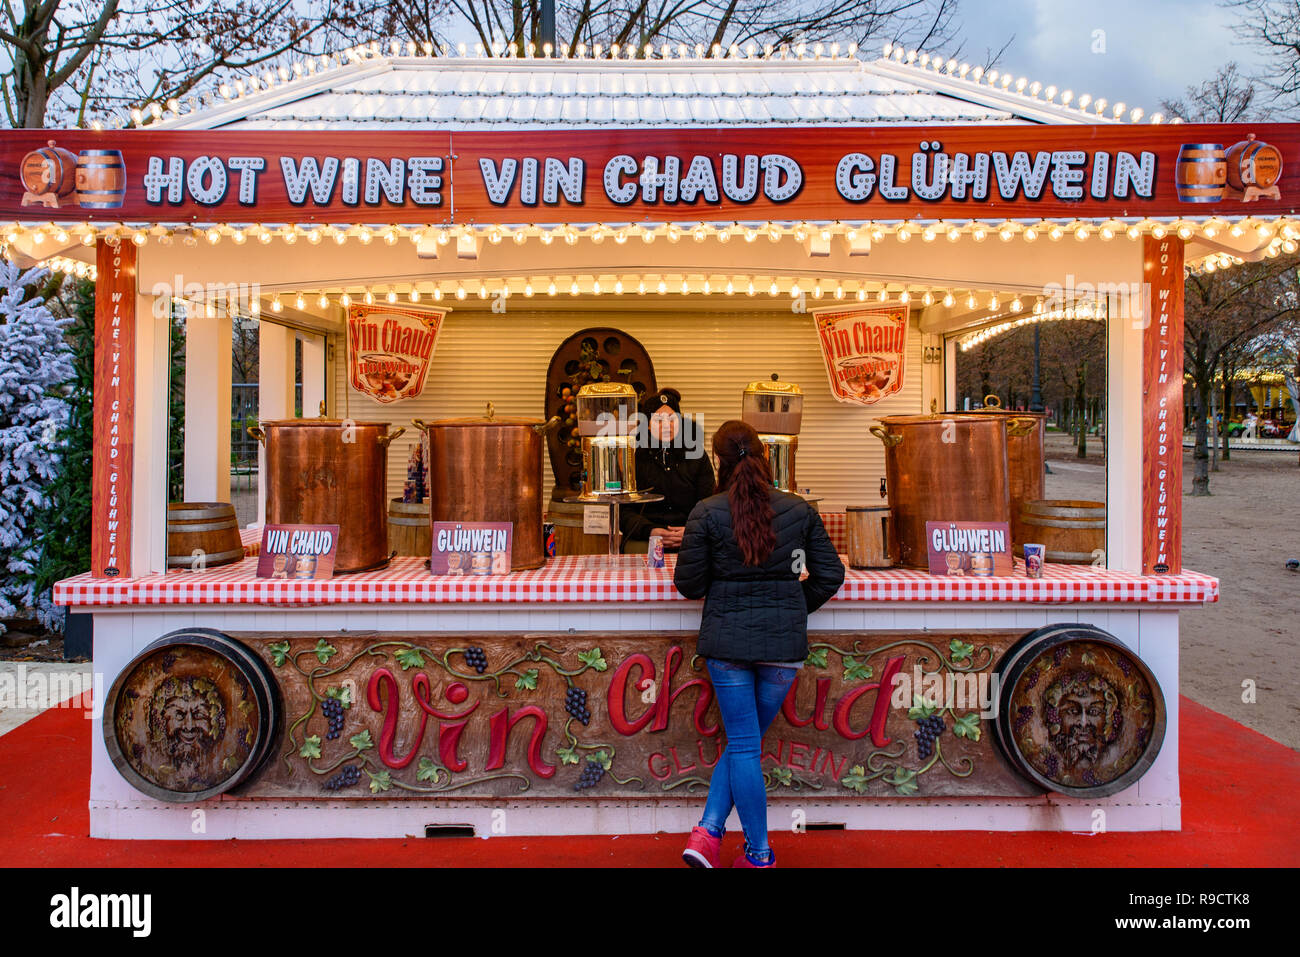 Hot wine (vin chaud) stall in 2018 Christmas market in Tuileries Gardens, Paris, France Stock Photo